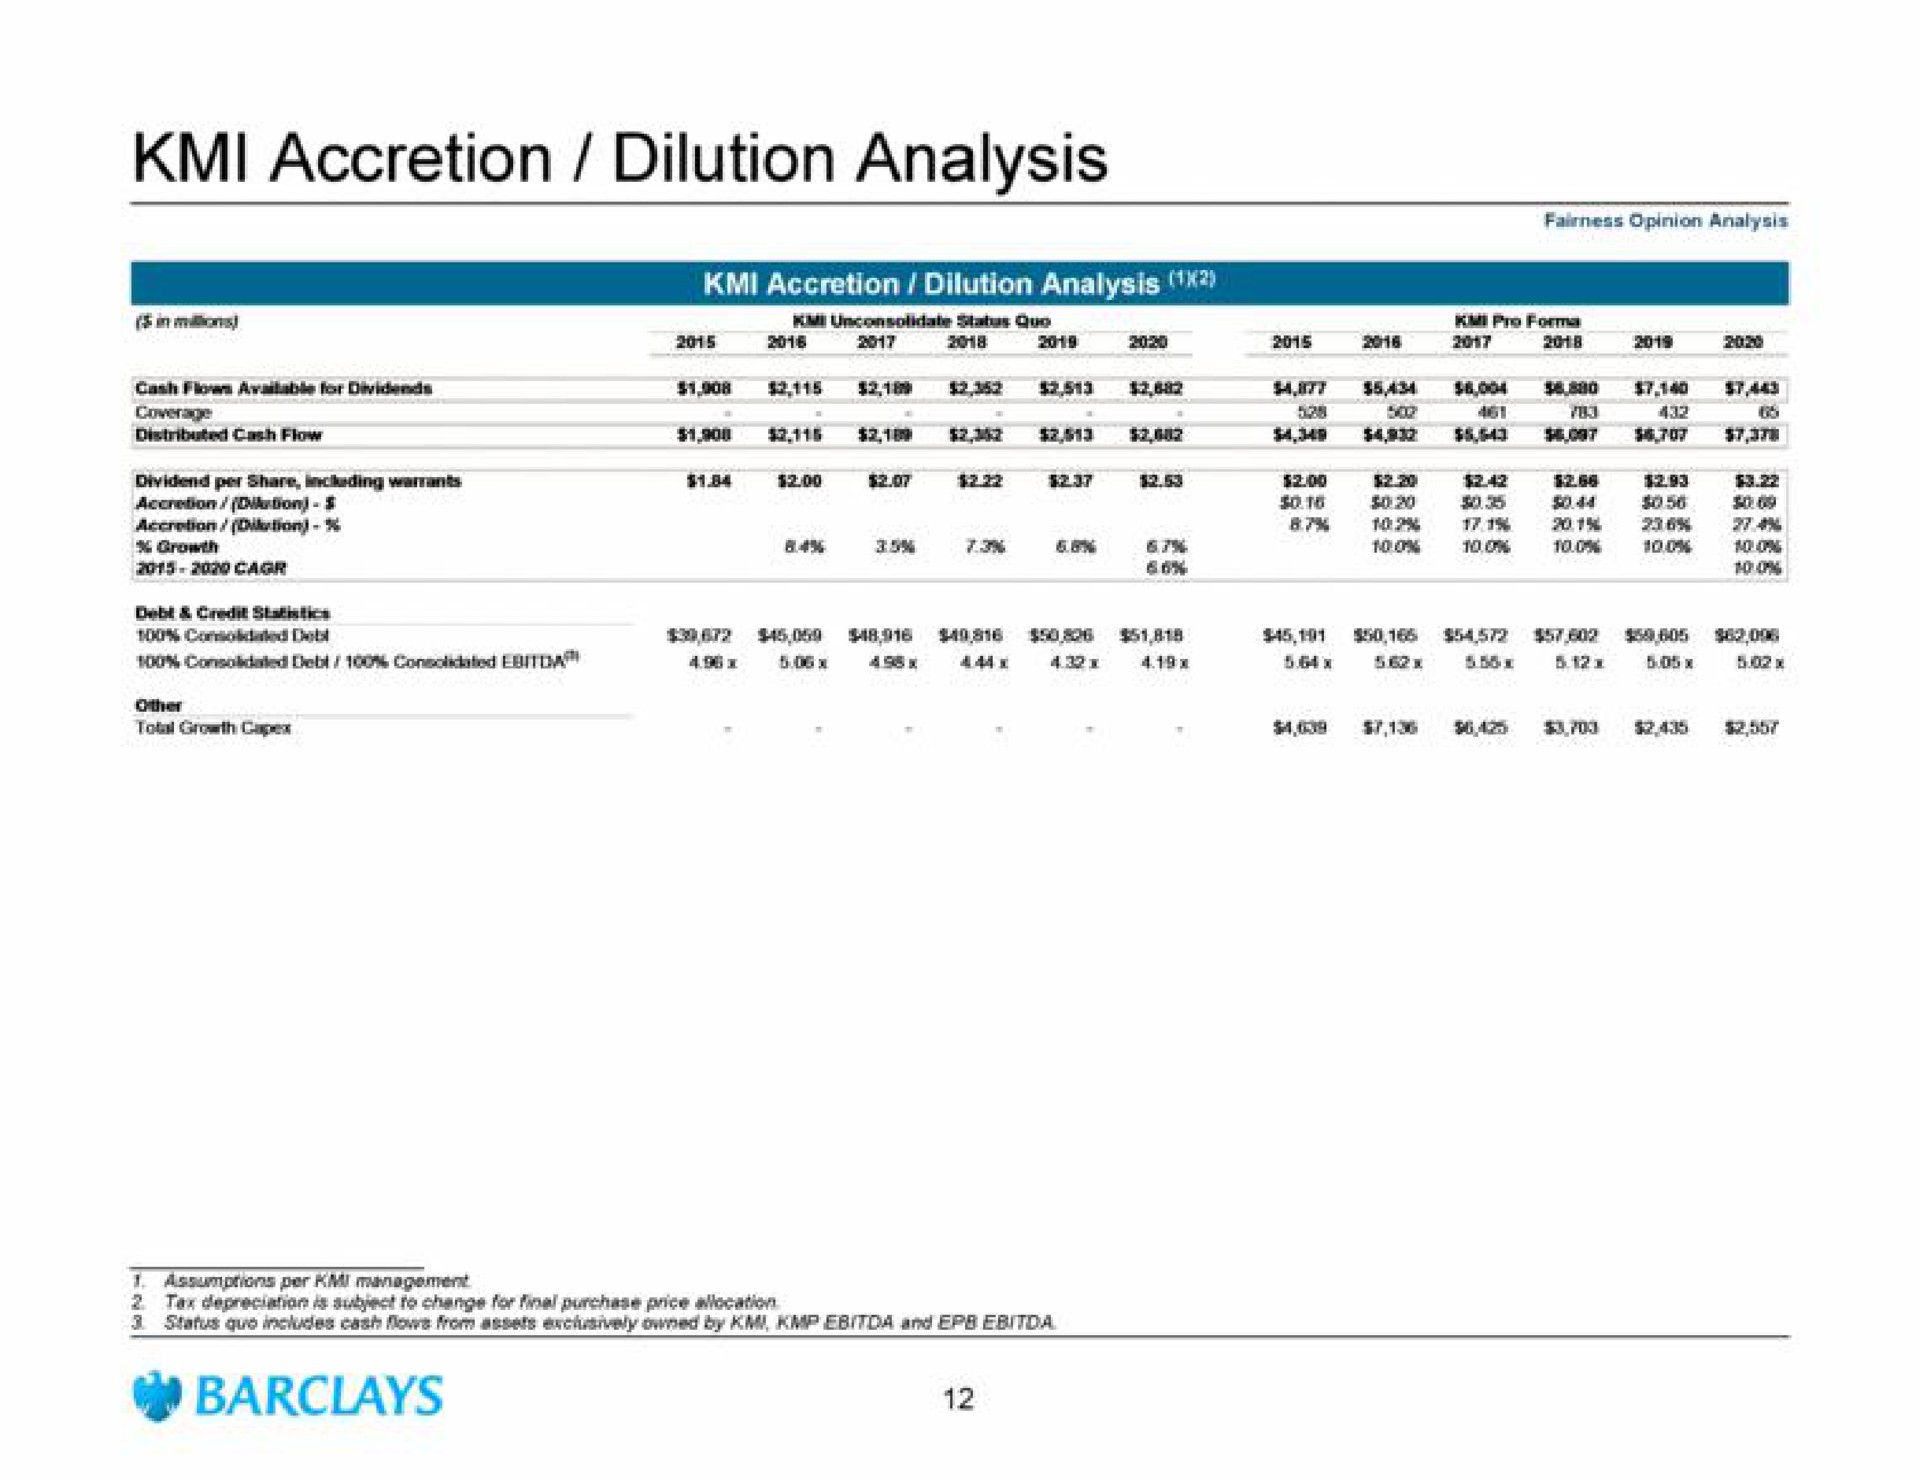 accretion dilution analysis | Barclays